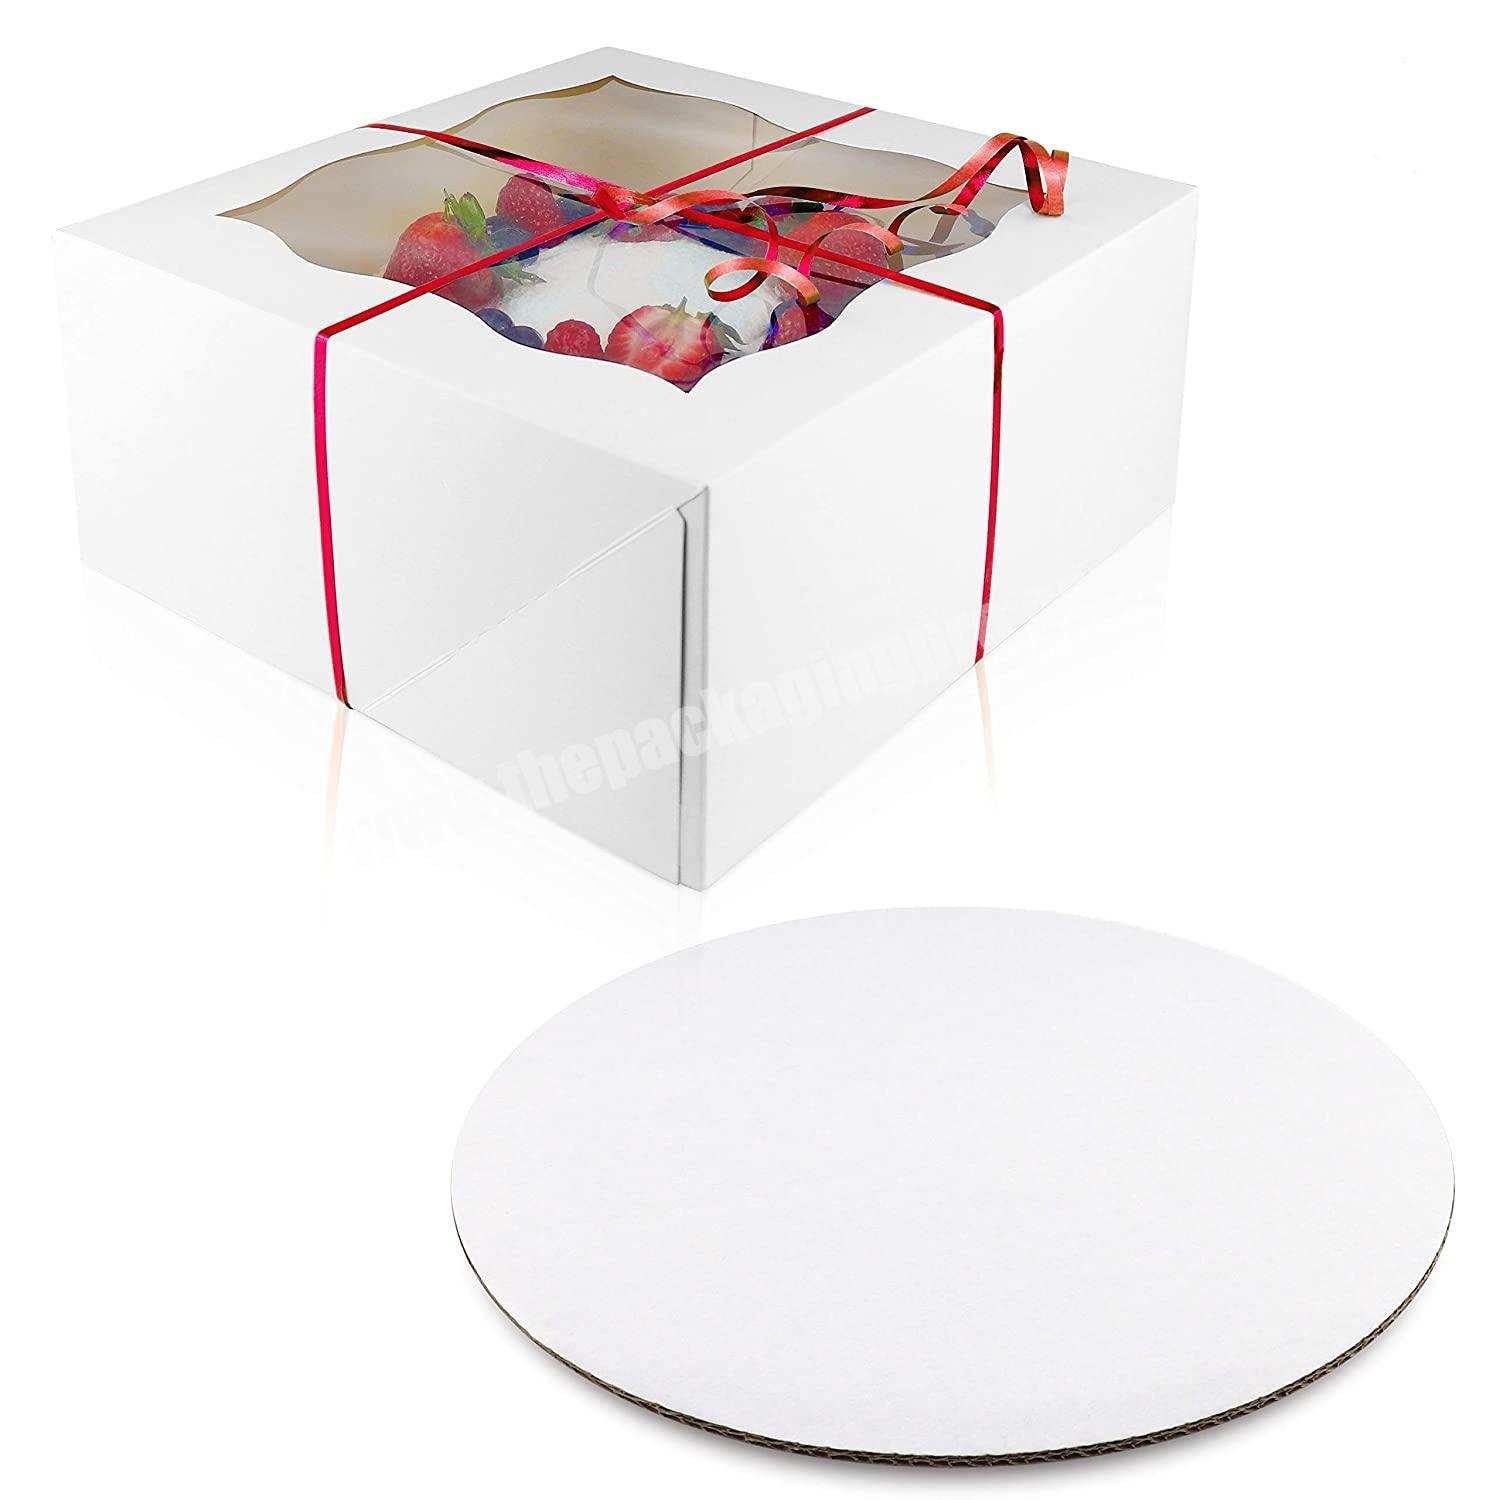 Cake Boxes Cake Boards Set 10 Sturdy Cake Boxes 10 x 10 x 5 & 10 Inch Cake Boards  Window Cardboard Cake Boxes